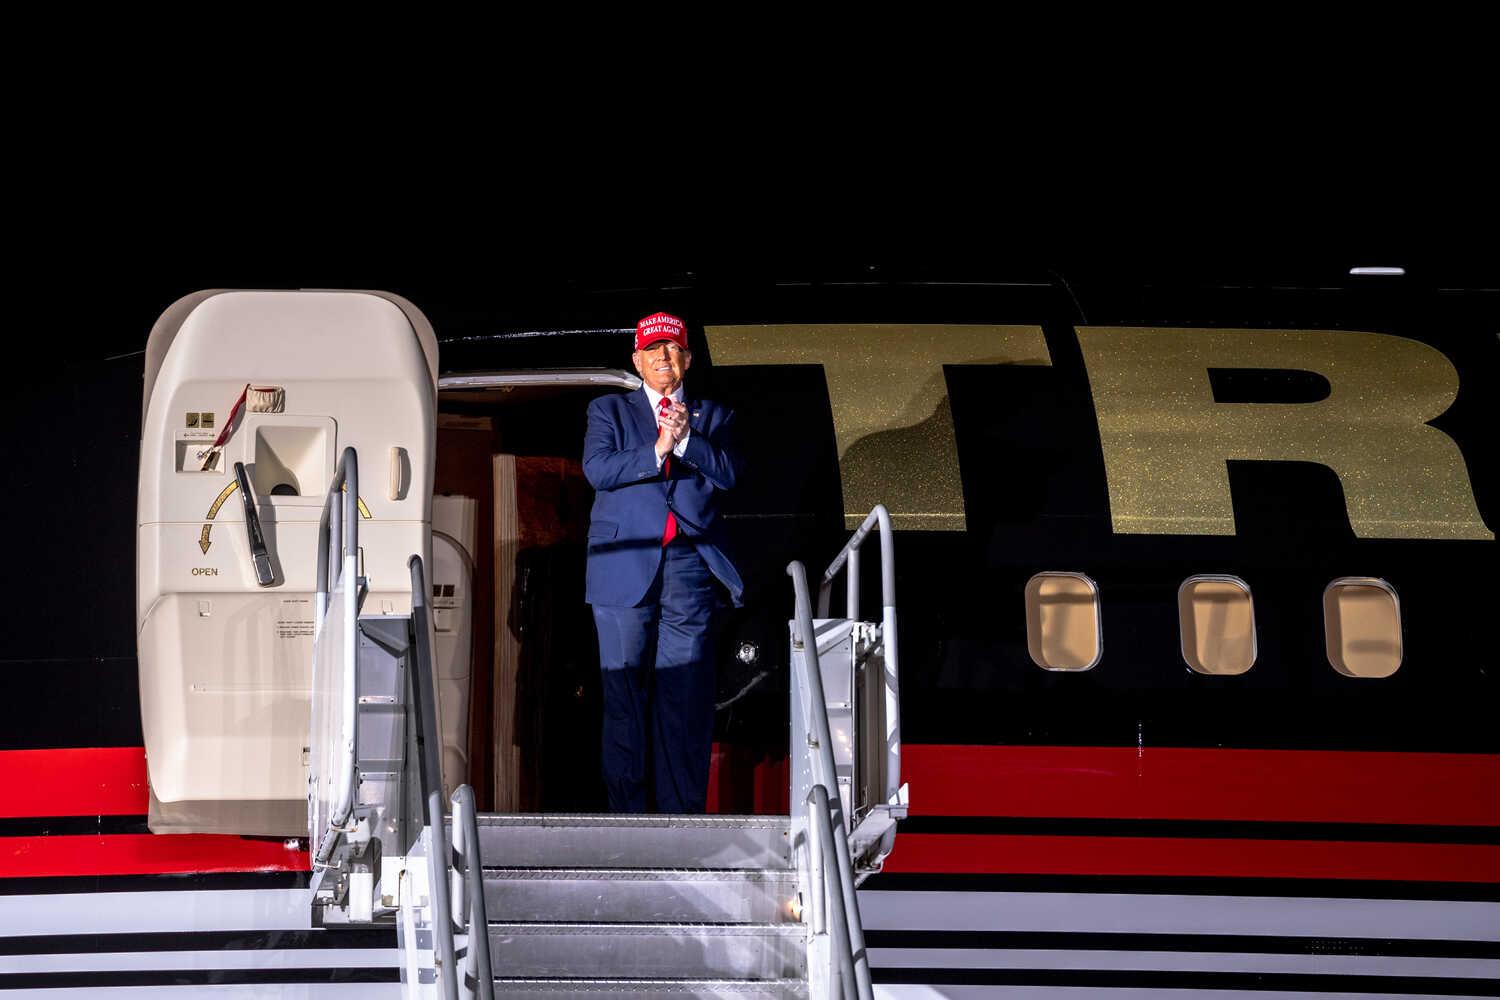 Donald Trump, wearing a red cap, stands at the exit door of his jet, which is painted in red, white and blue, with stairs in front of him. The letters T and R are visible behind him.